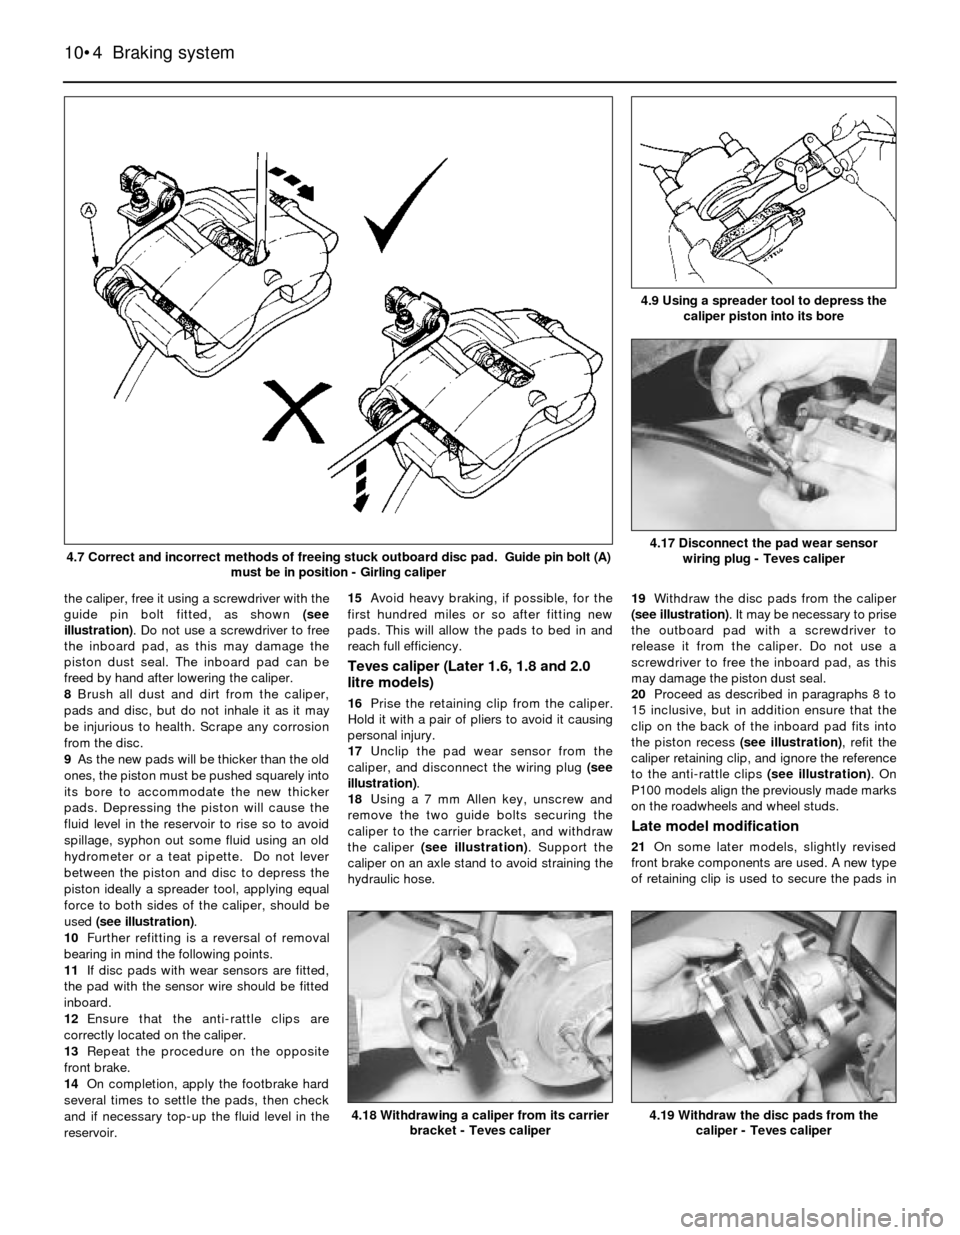 FORD SIERRA 1991 2.G Braking System Workshop Manual the caliper, free it using a screwdriver with the
guide pin bolt fitted, as shown (see
illustration). Do not use a screwdriver to free
the inboard pad, as this may damage the
piston dust seal. The inb